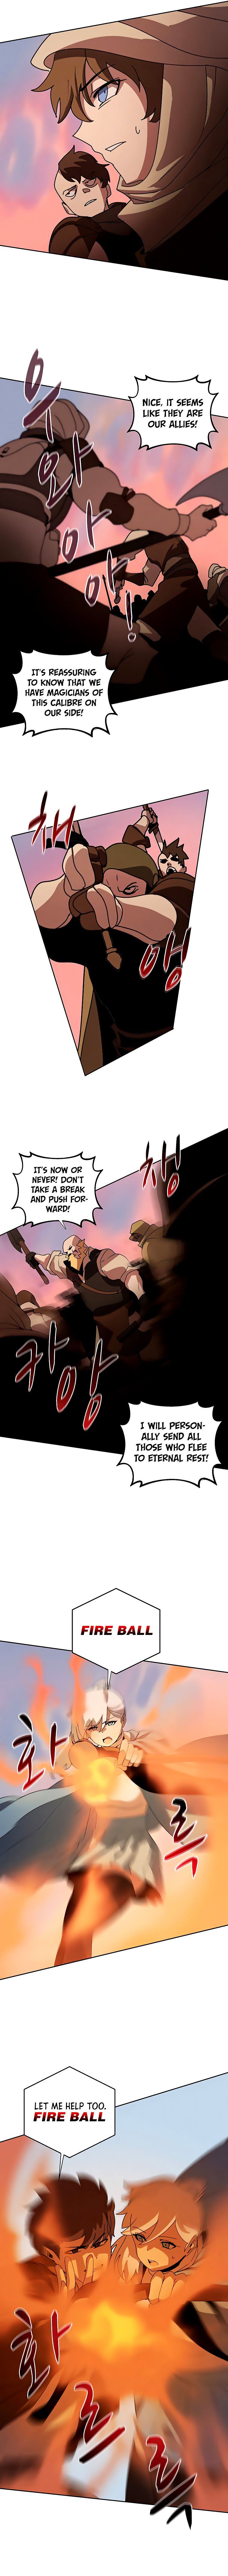 Book Eater Chapter 34 page 4